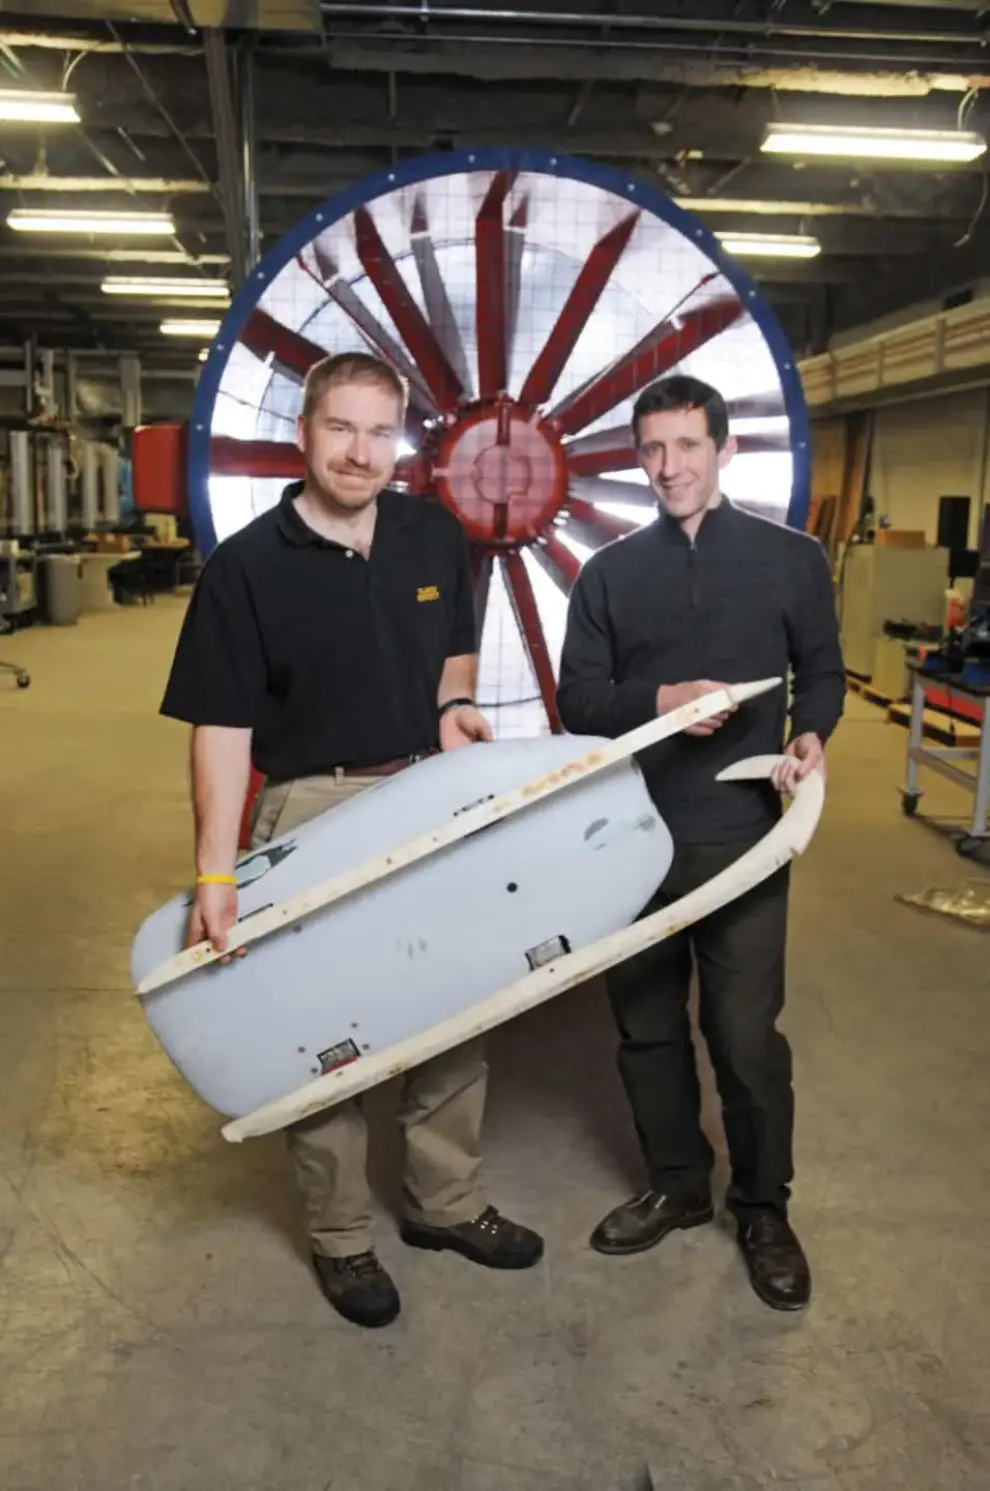 Aerodynamics of U.S. Luge Sleds Will Lead to Innovation in Vehicle Design